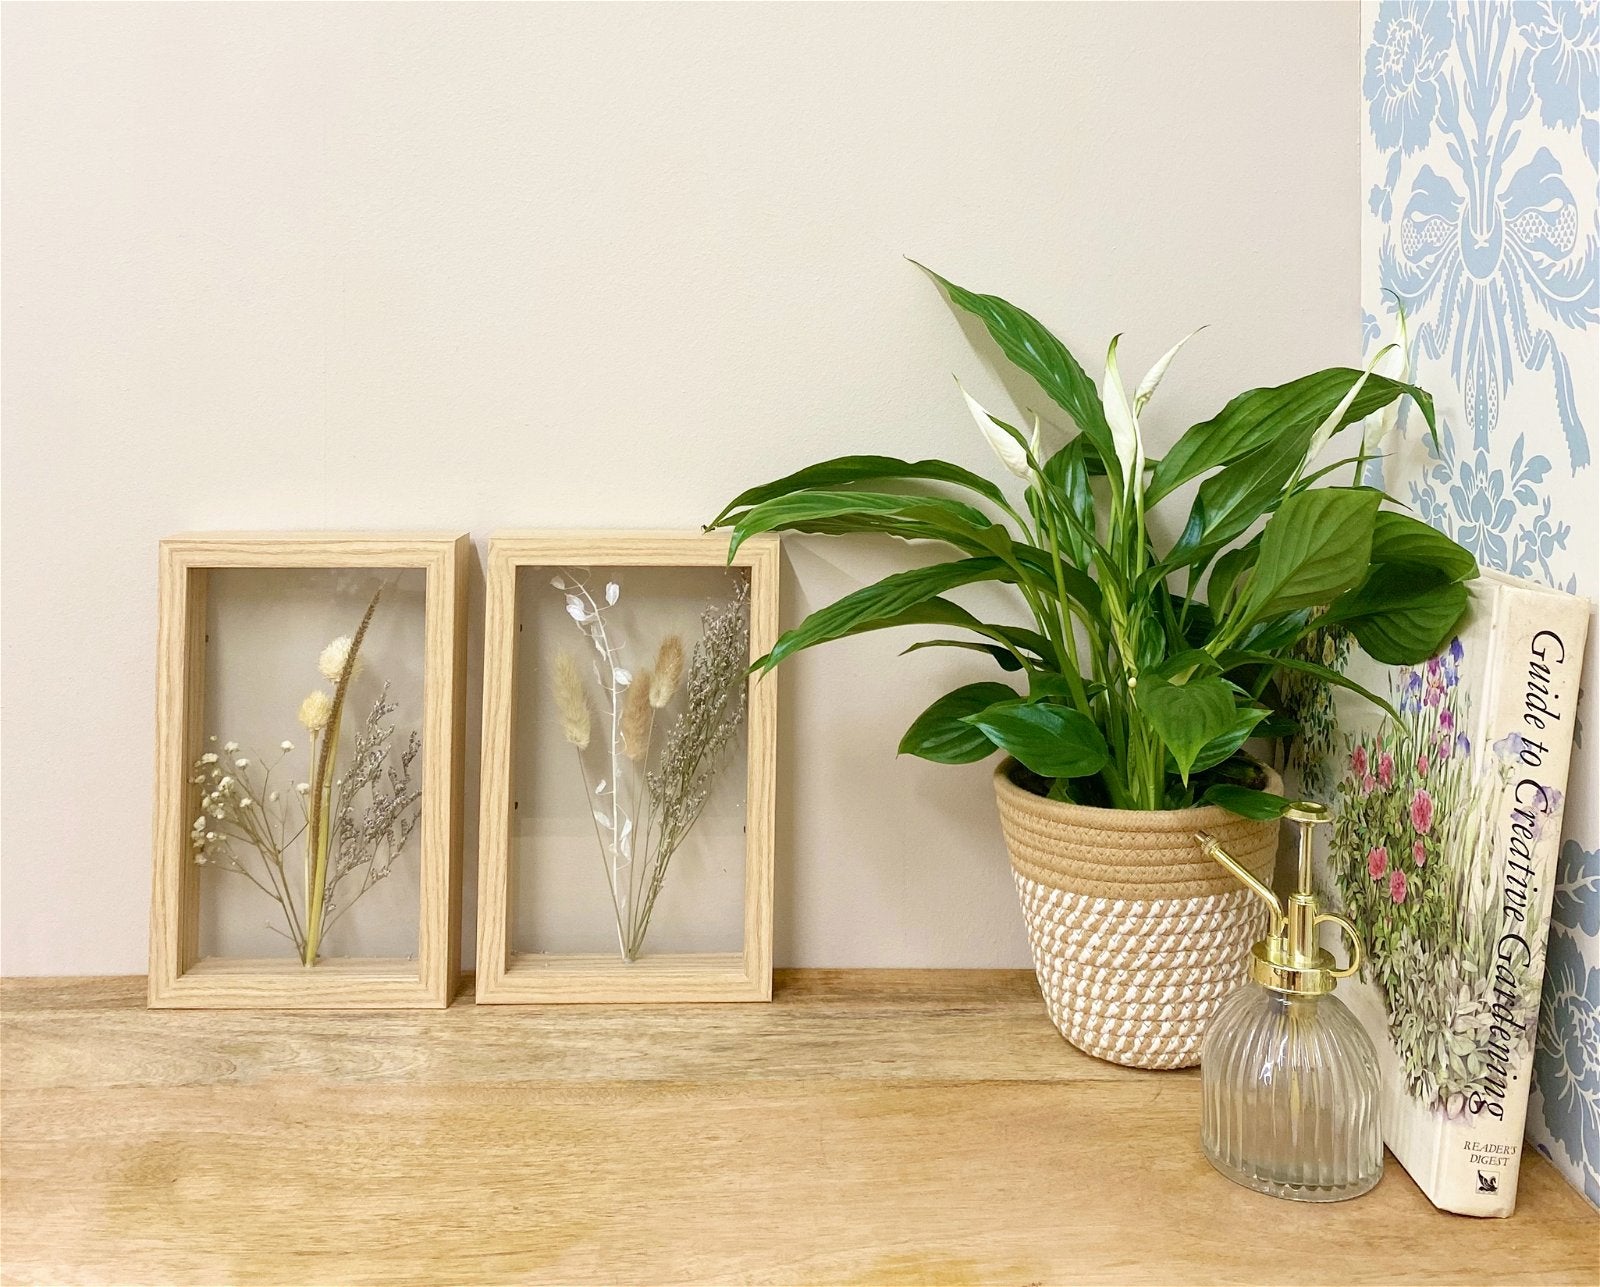 View Pressed Flowers in Wooden Frames information